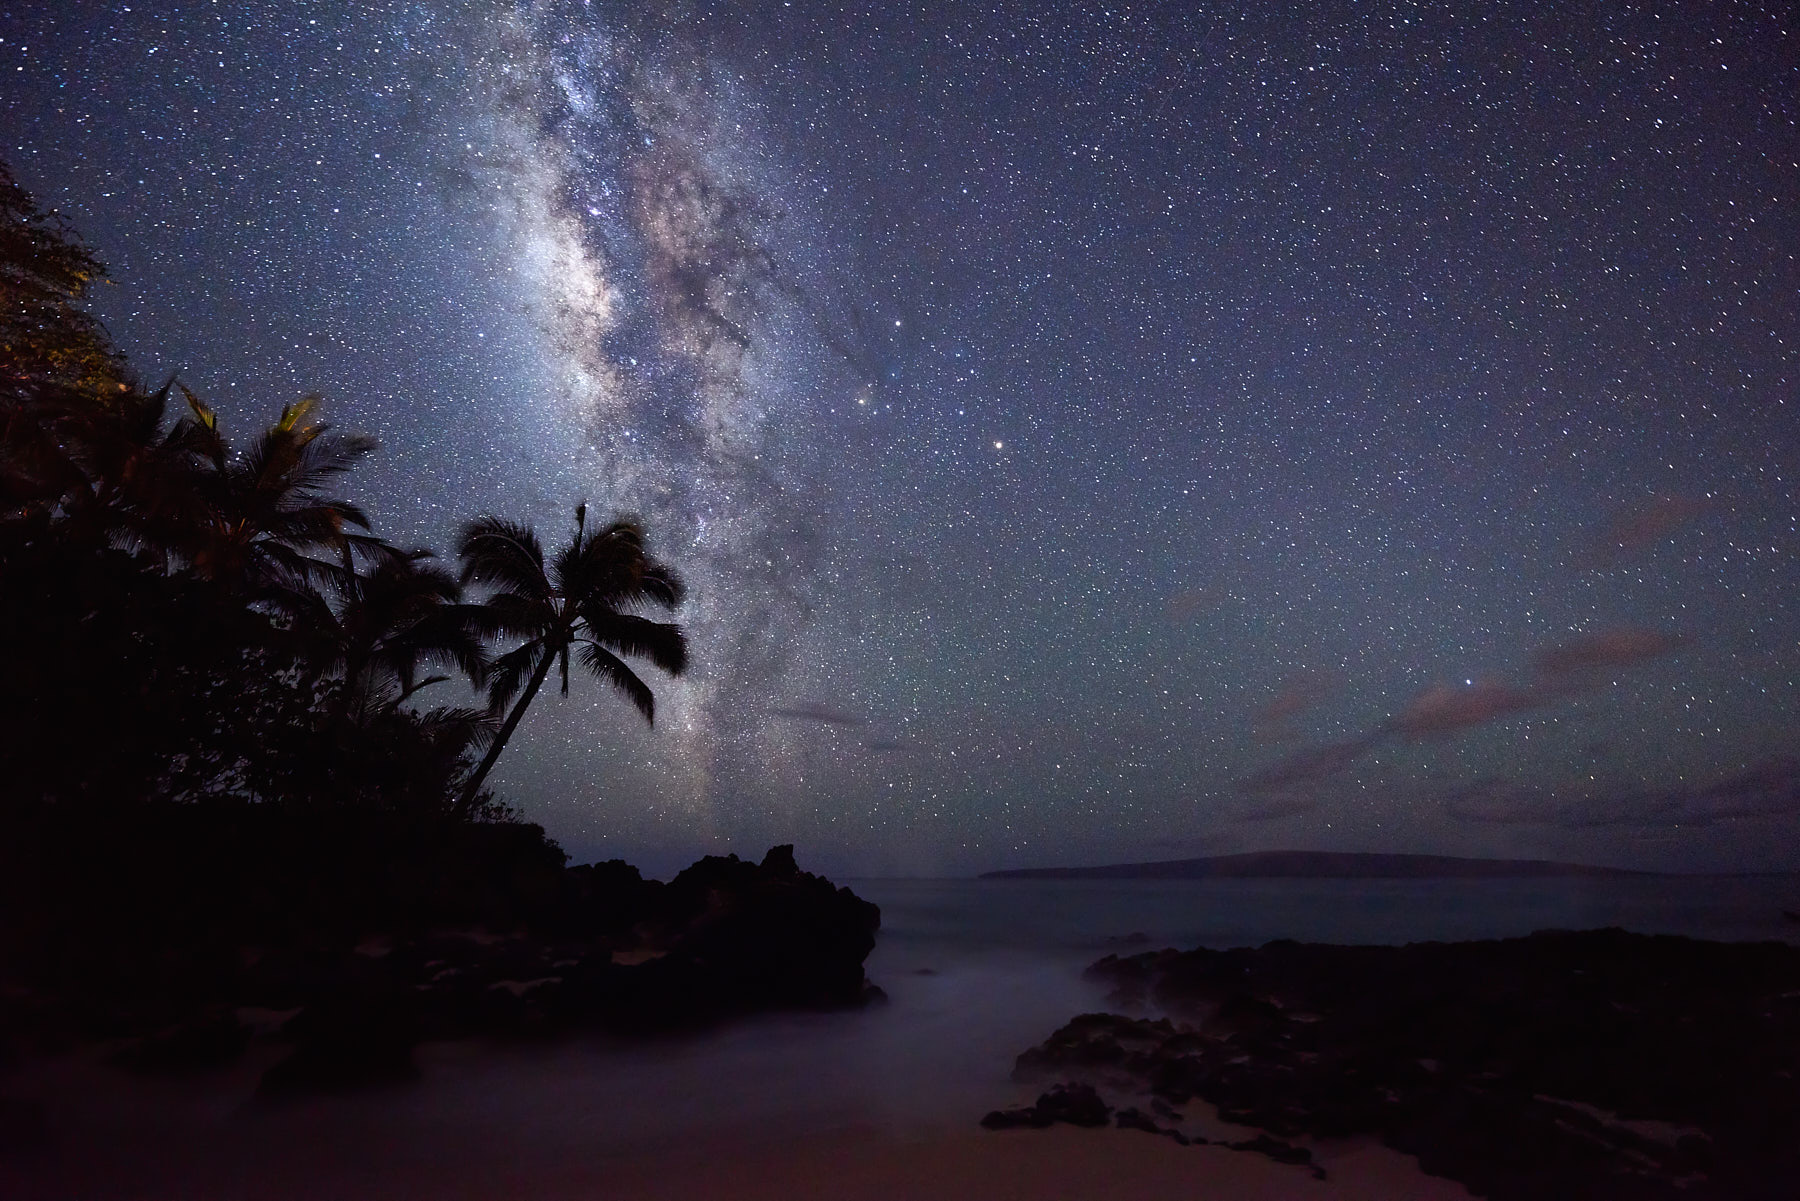 The core of the milky way galaxy rises over Secret Beach (also known as Makena Cove) at night on the island of Maui, Hawaii